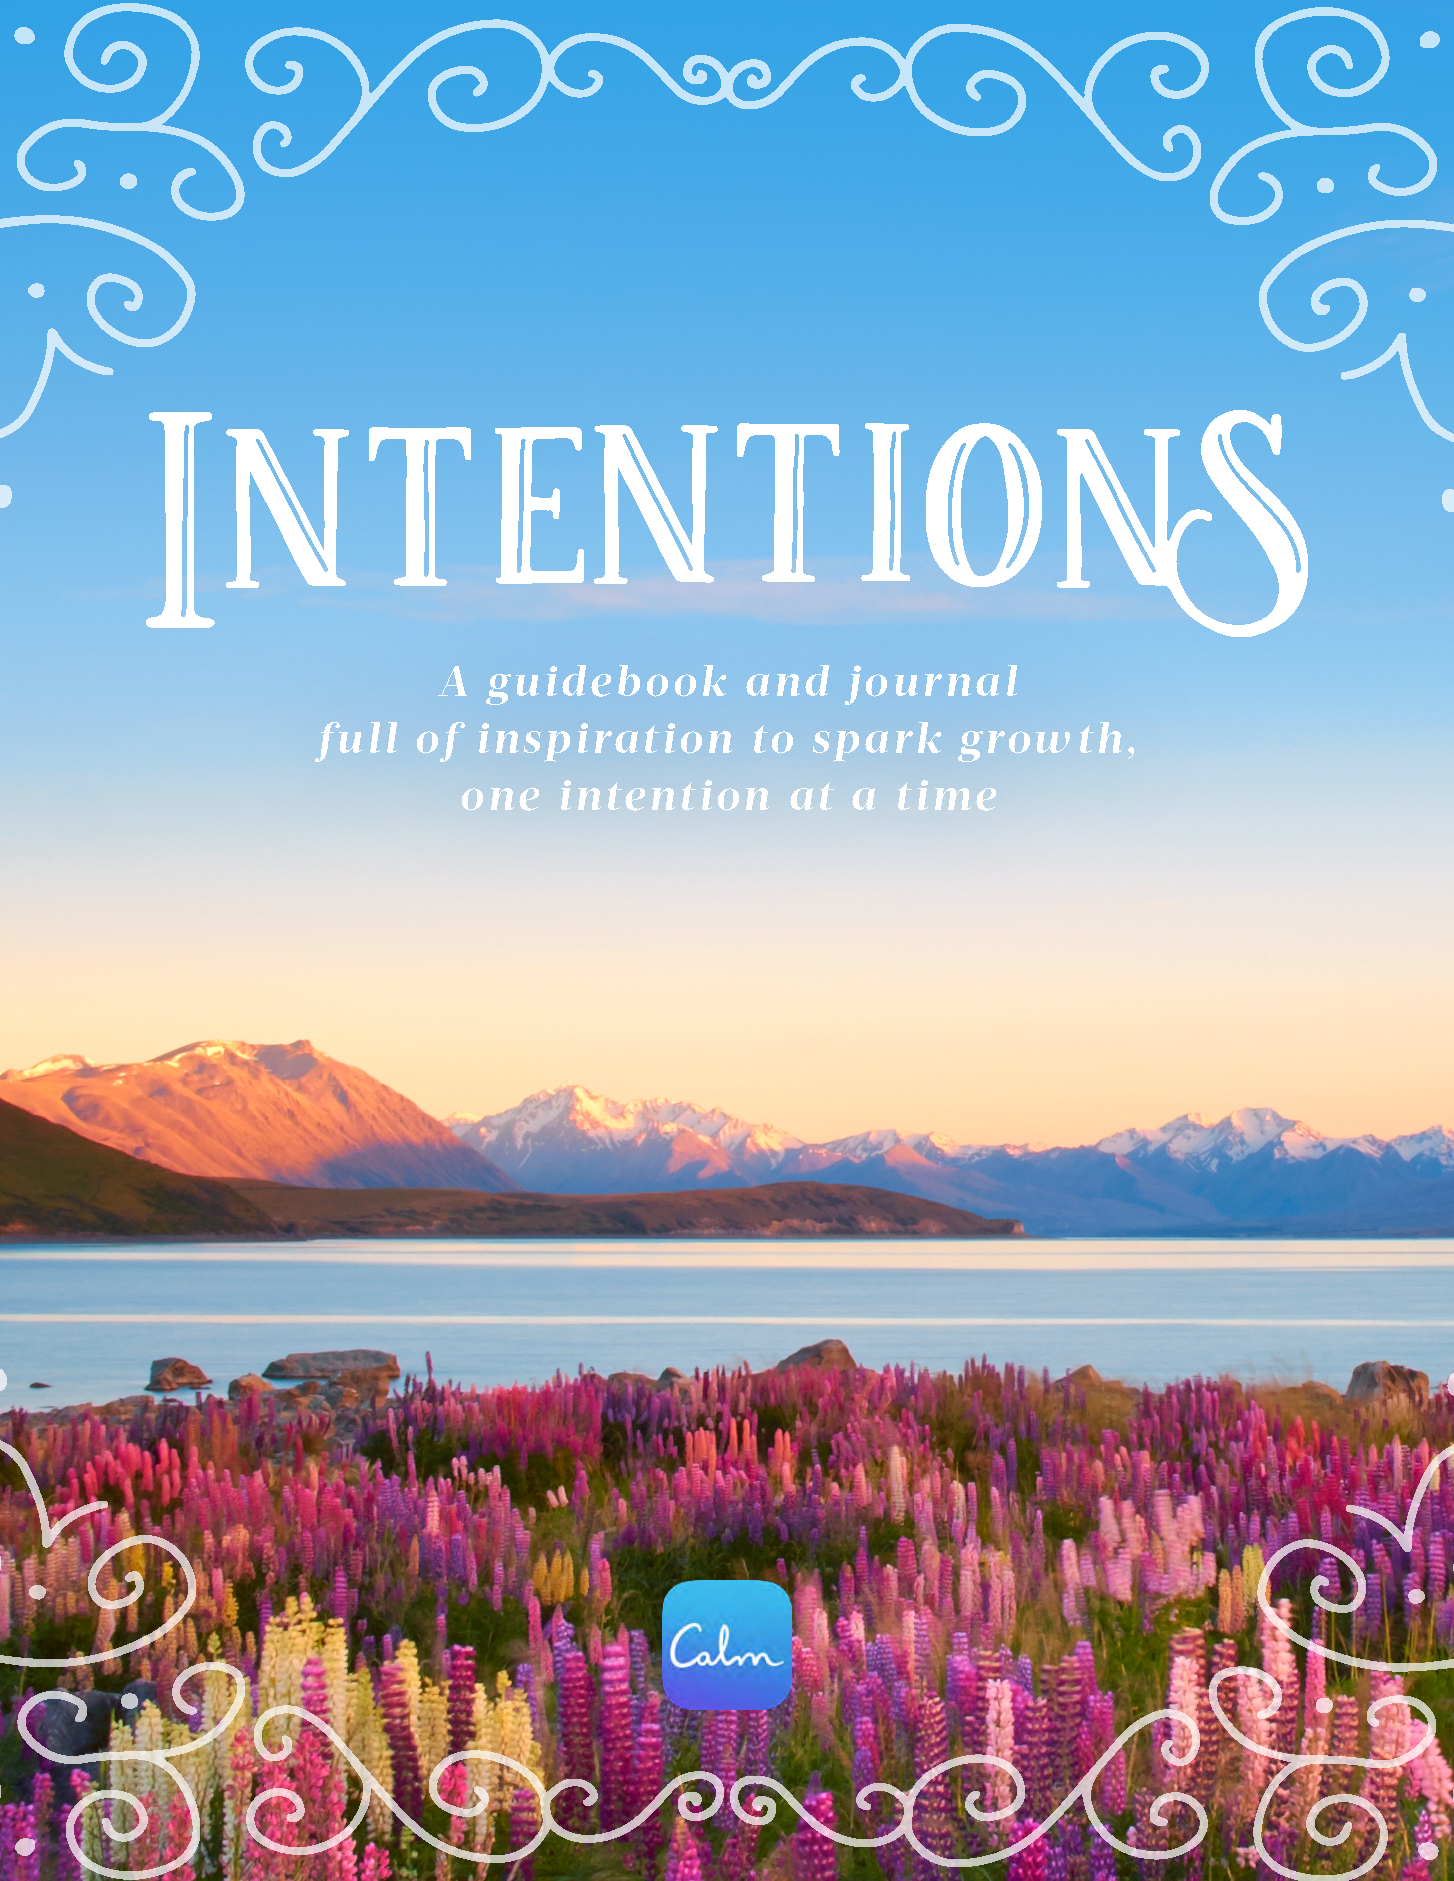 Calm Intentions Journal LR_Page_01.png